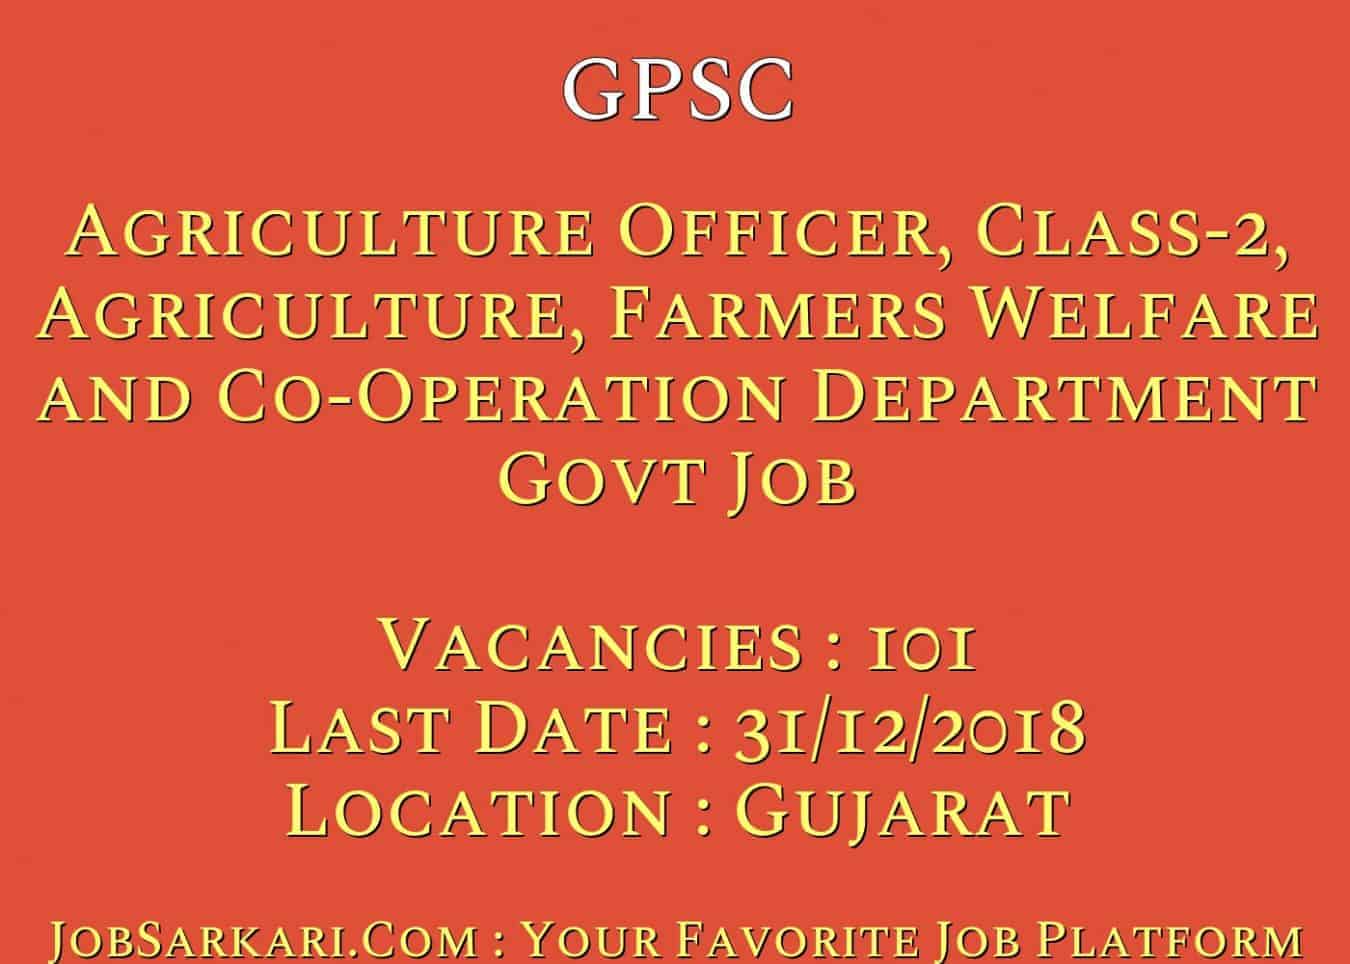 GPSC Recruitment 2018 For Agriculture Officer, Class-2, Agriculture, Farmers Welfare and Co-Operation Department Govt Job